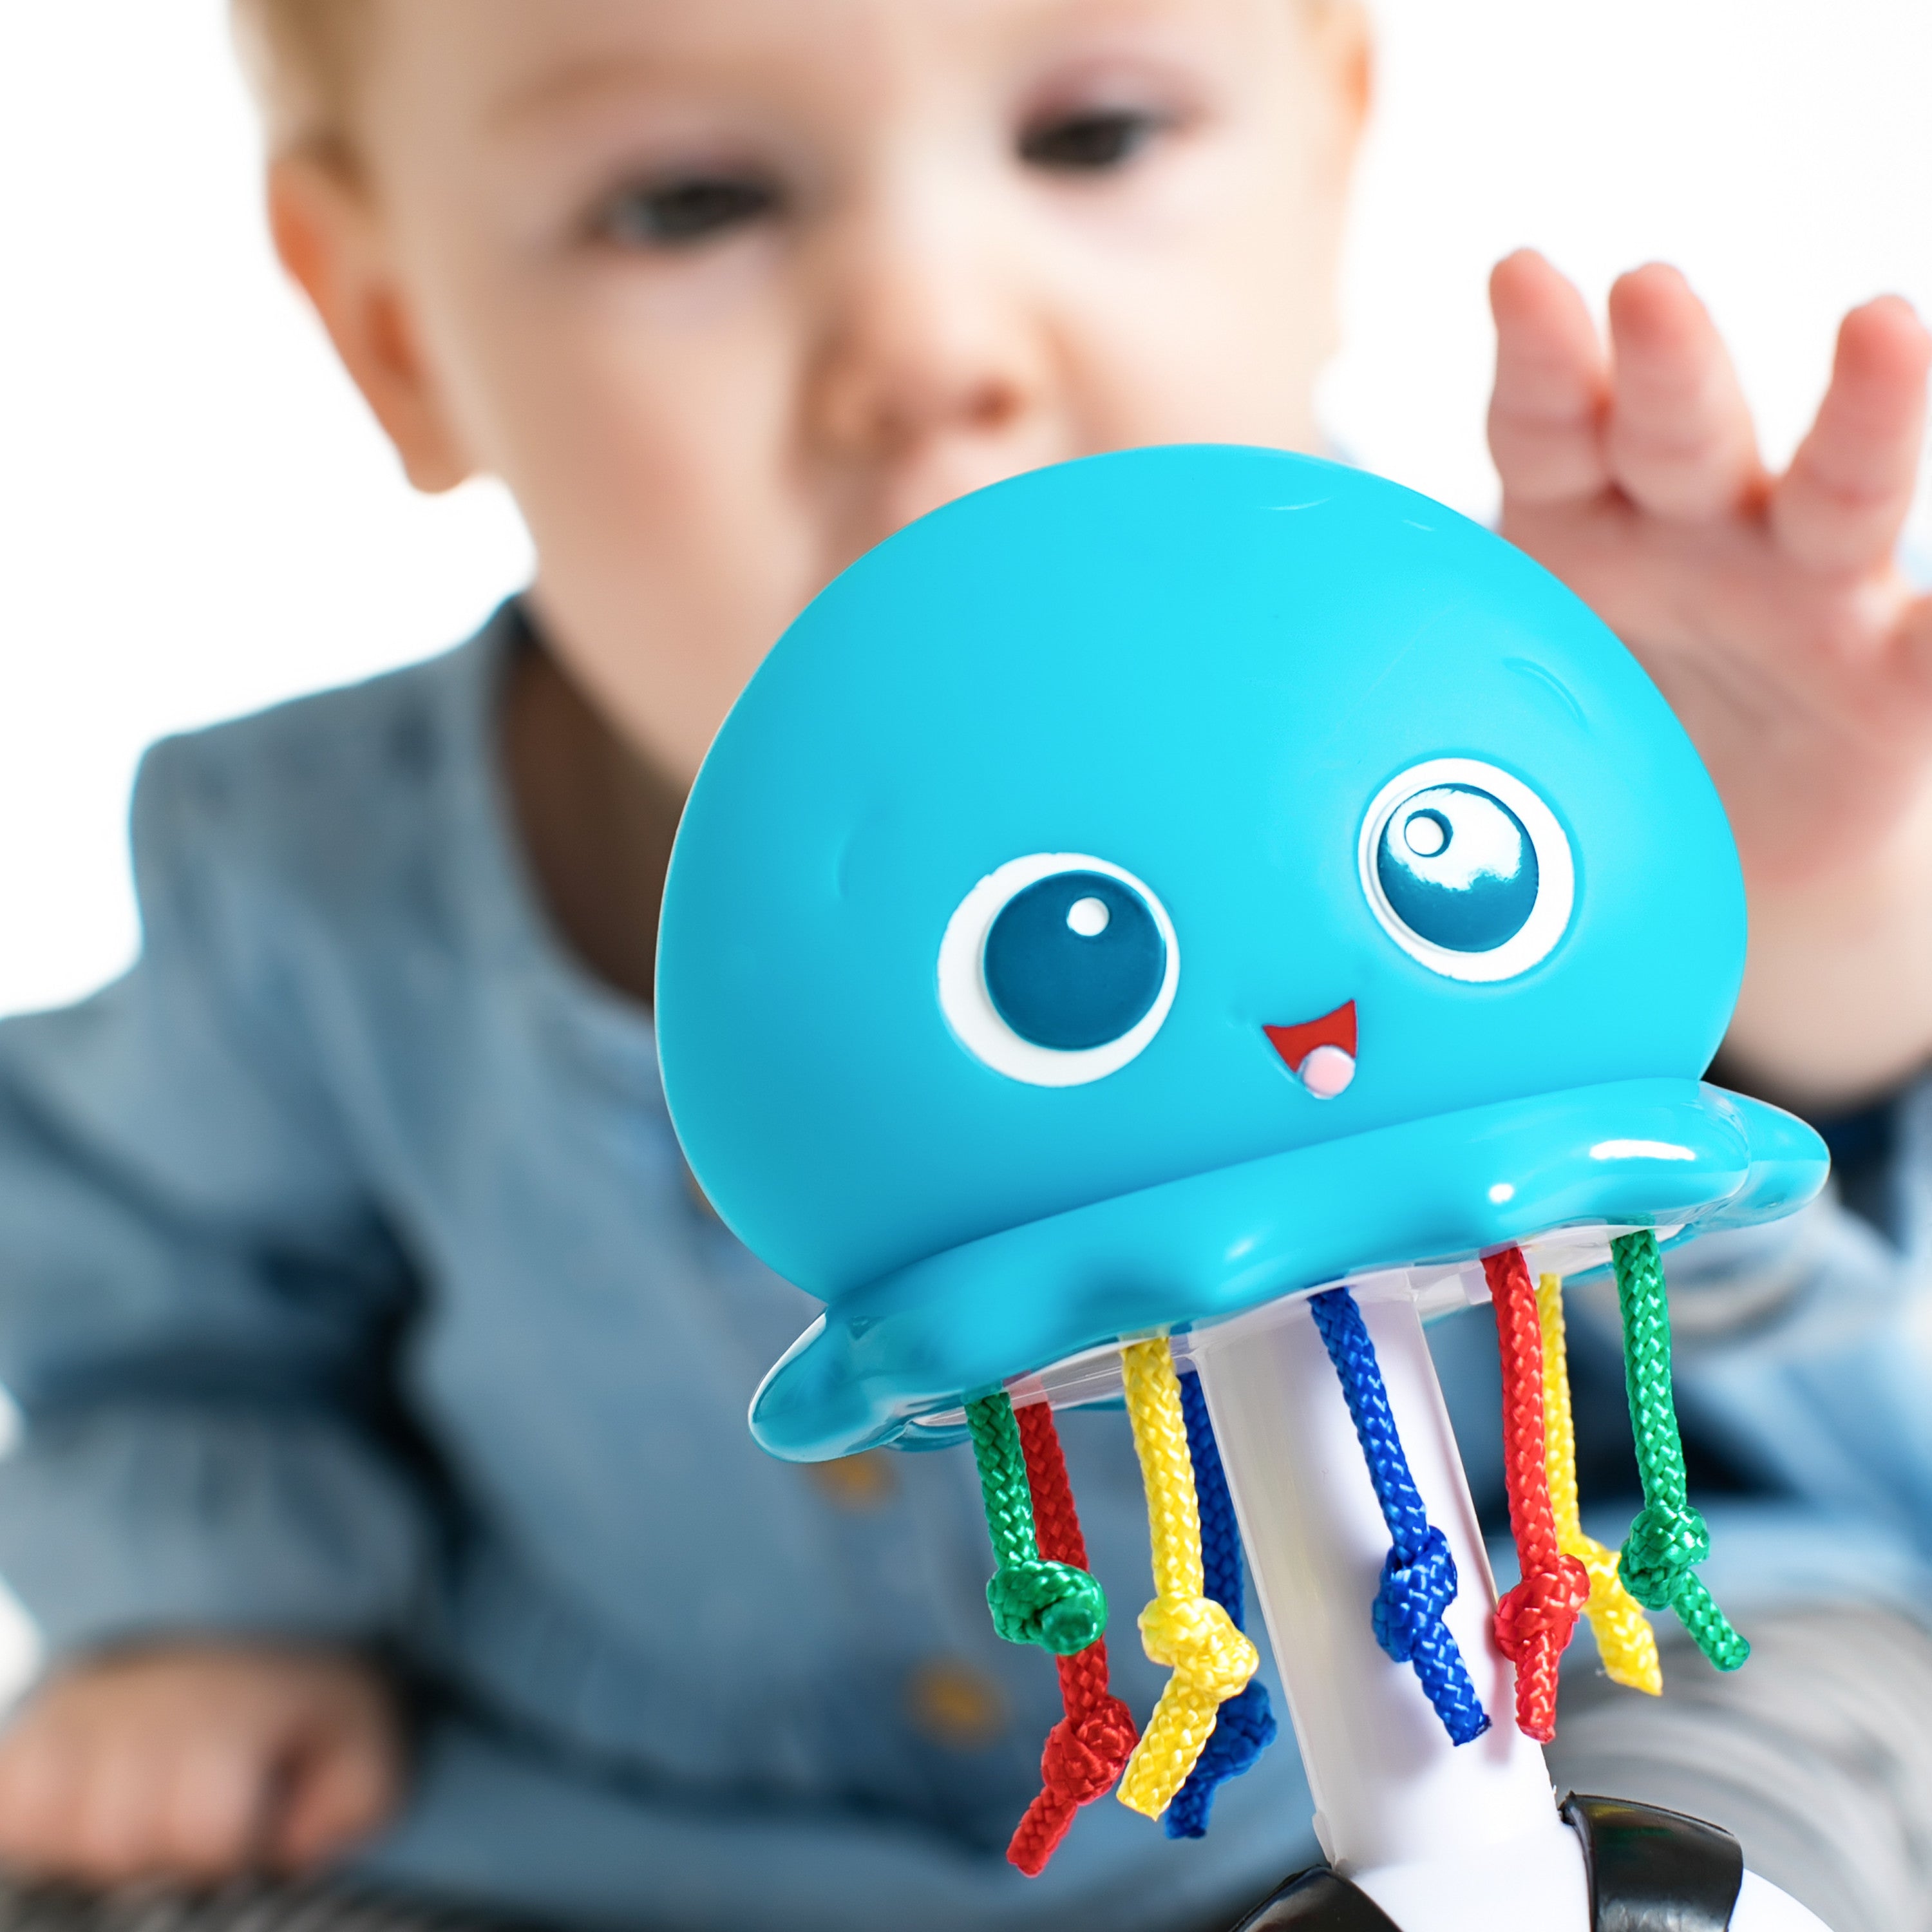 Baby Einstein' App Opens Minds with Educational Storytime - The Toy Insider